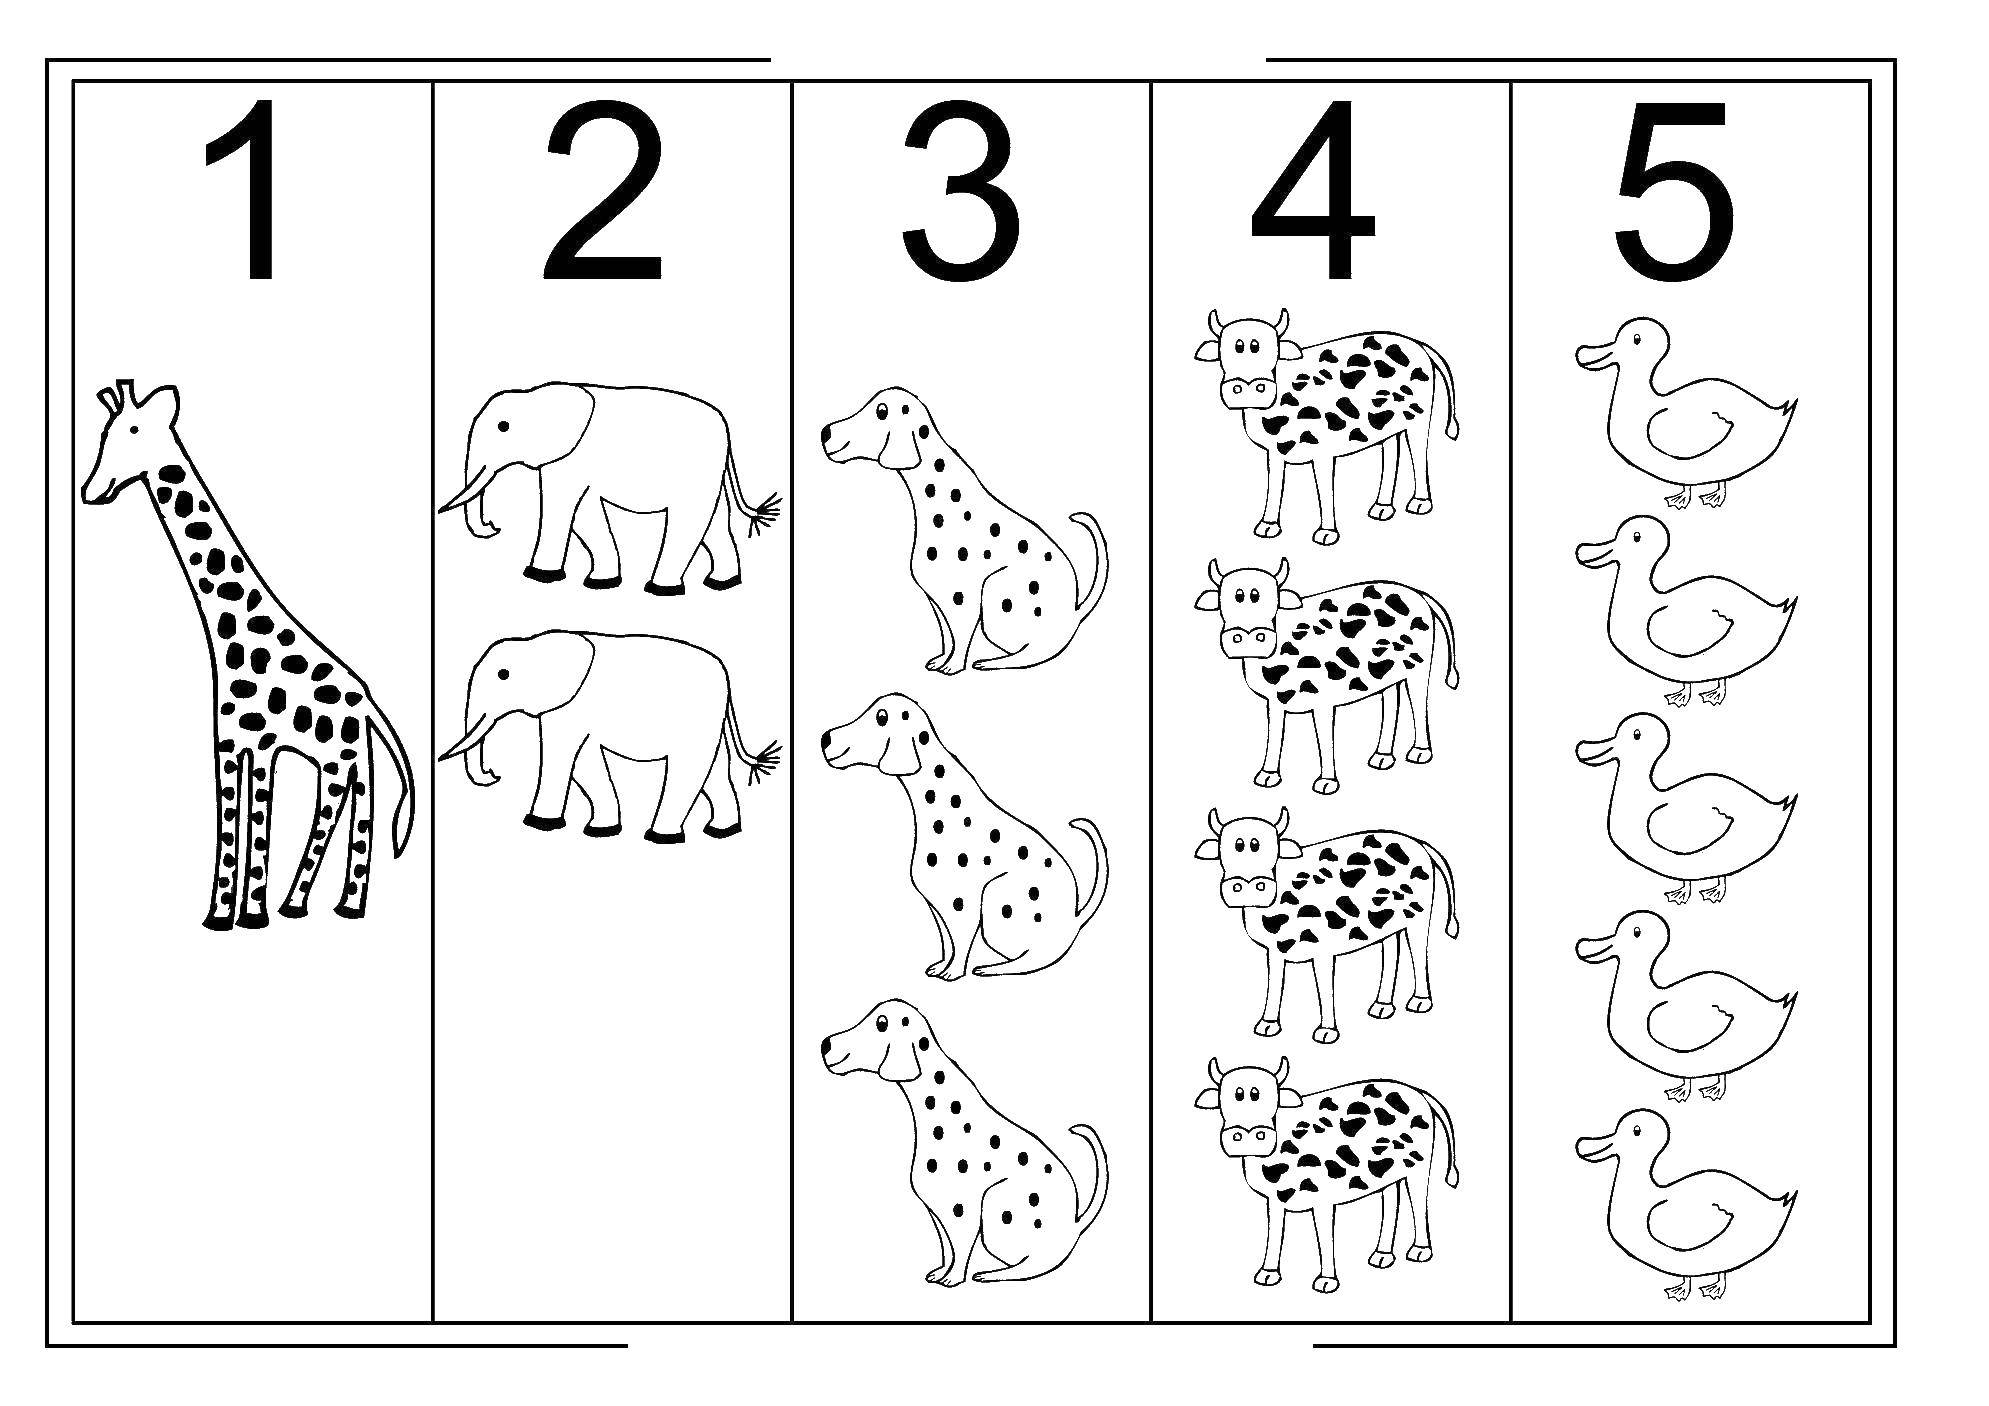 Coloring Math coloring figures with animals. Category mathematical coloring pages. Tags:  the mathematical coloring book.